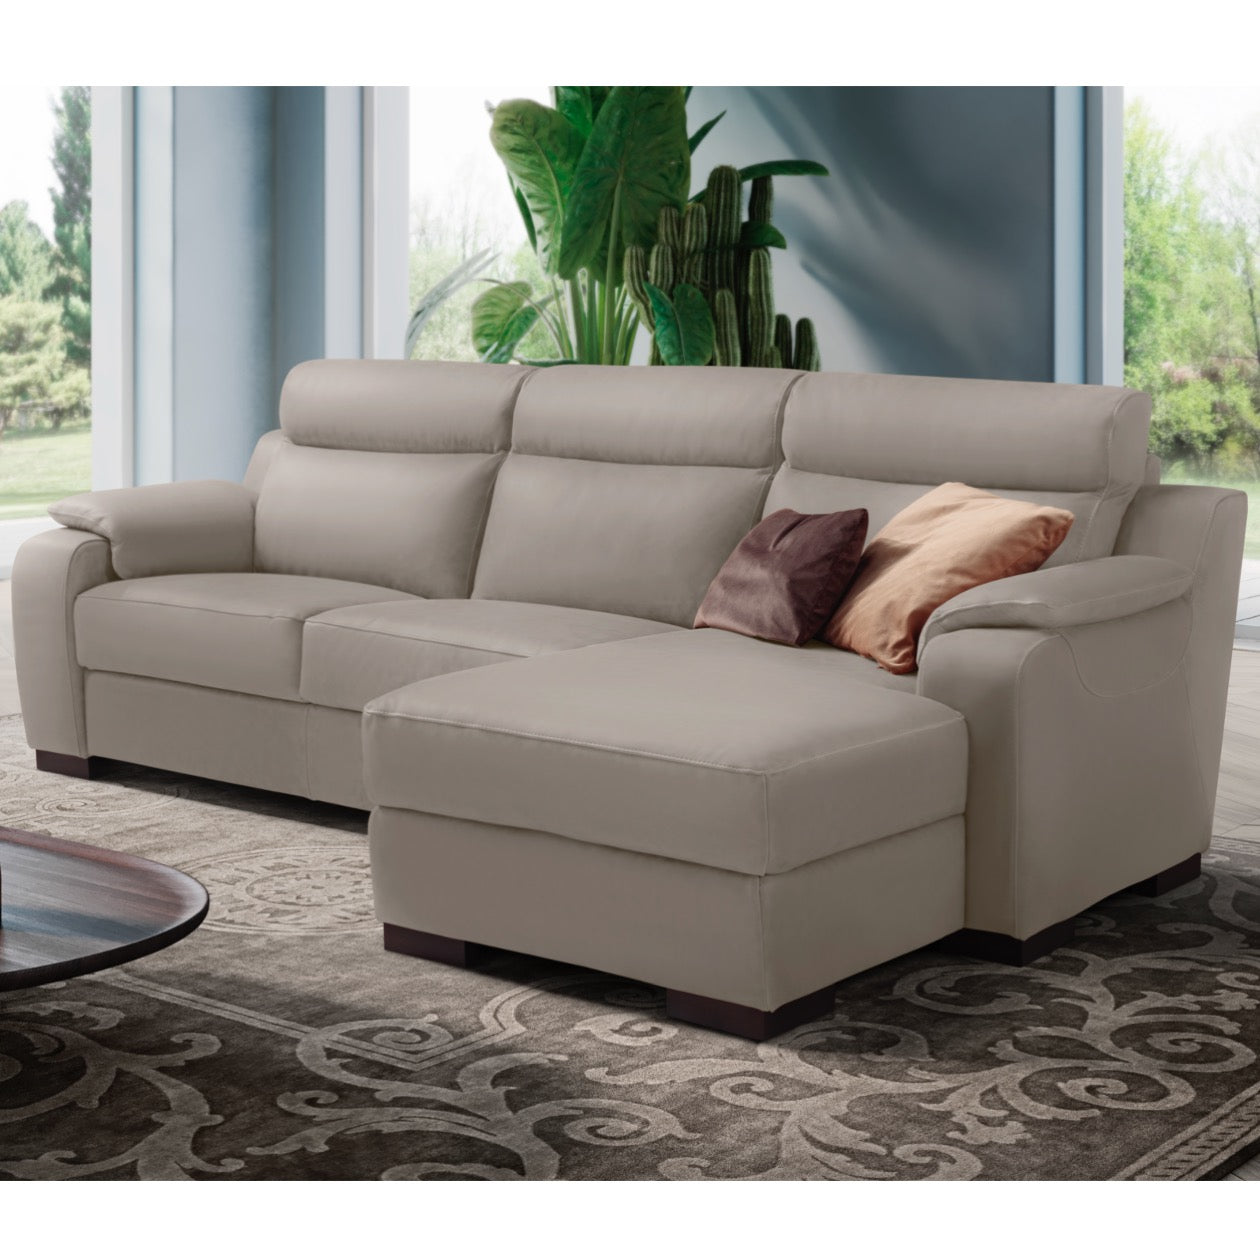 Ethos Right Hand Maxi Chaise Sofa Special Offer